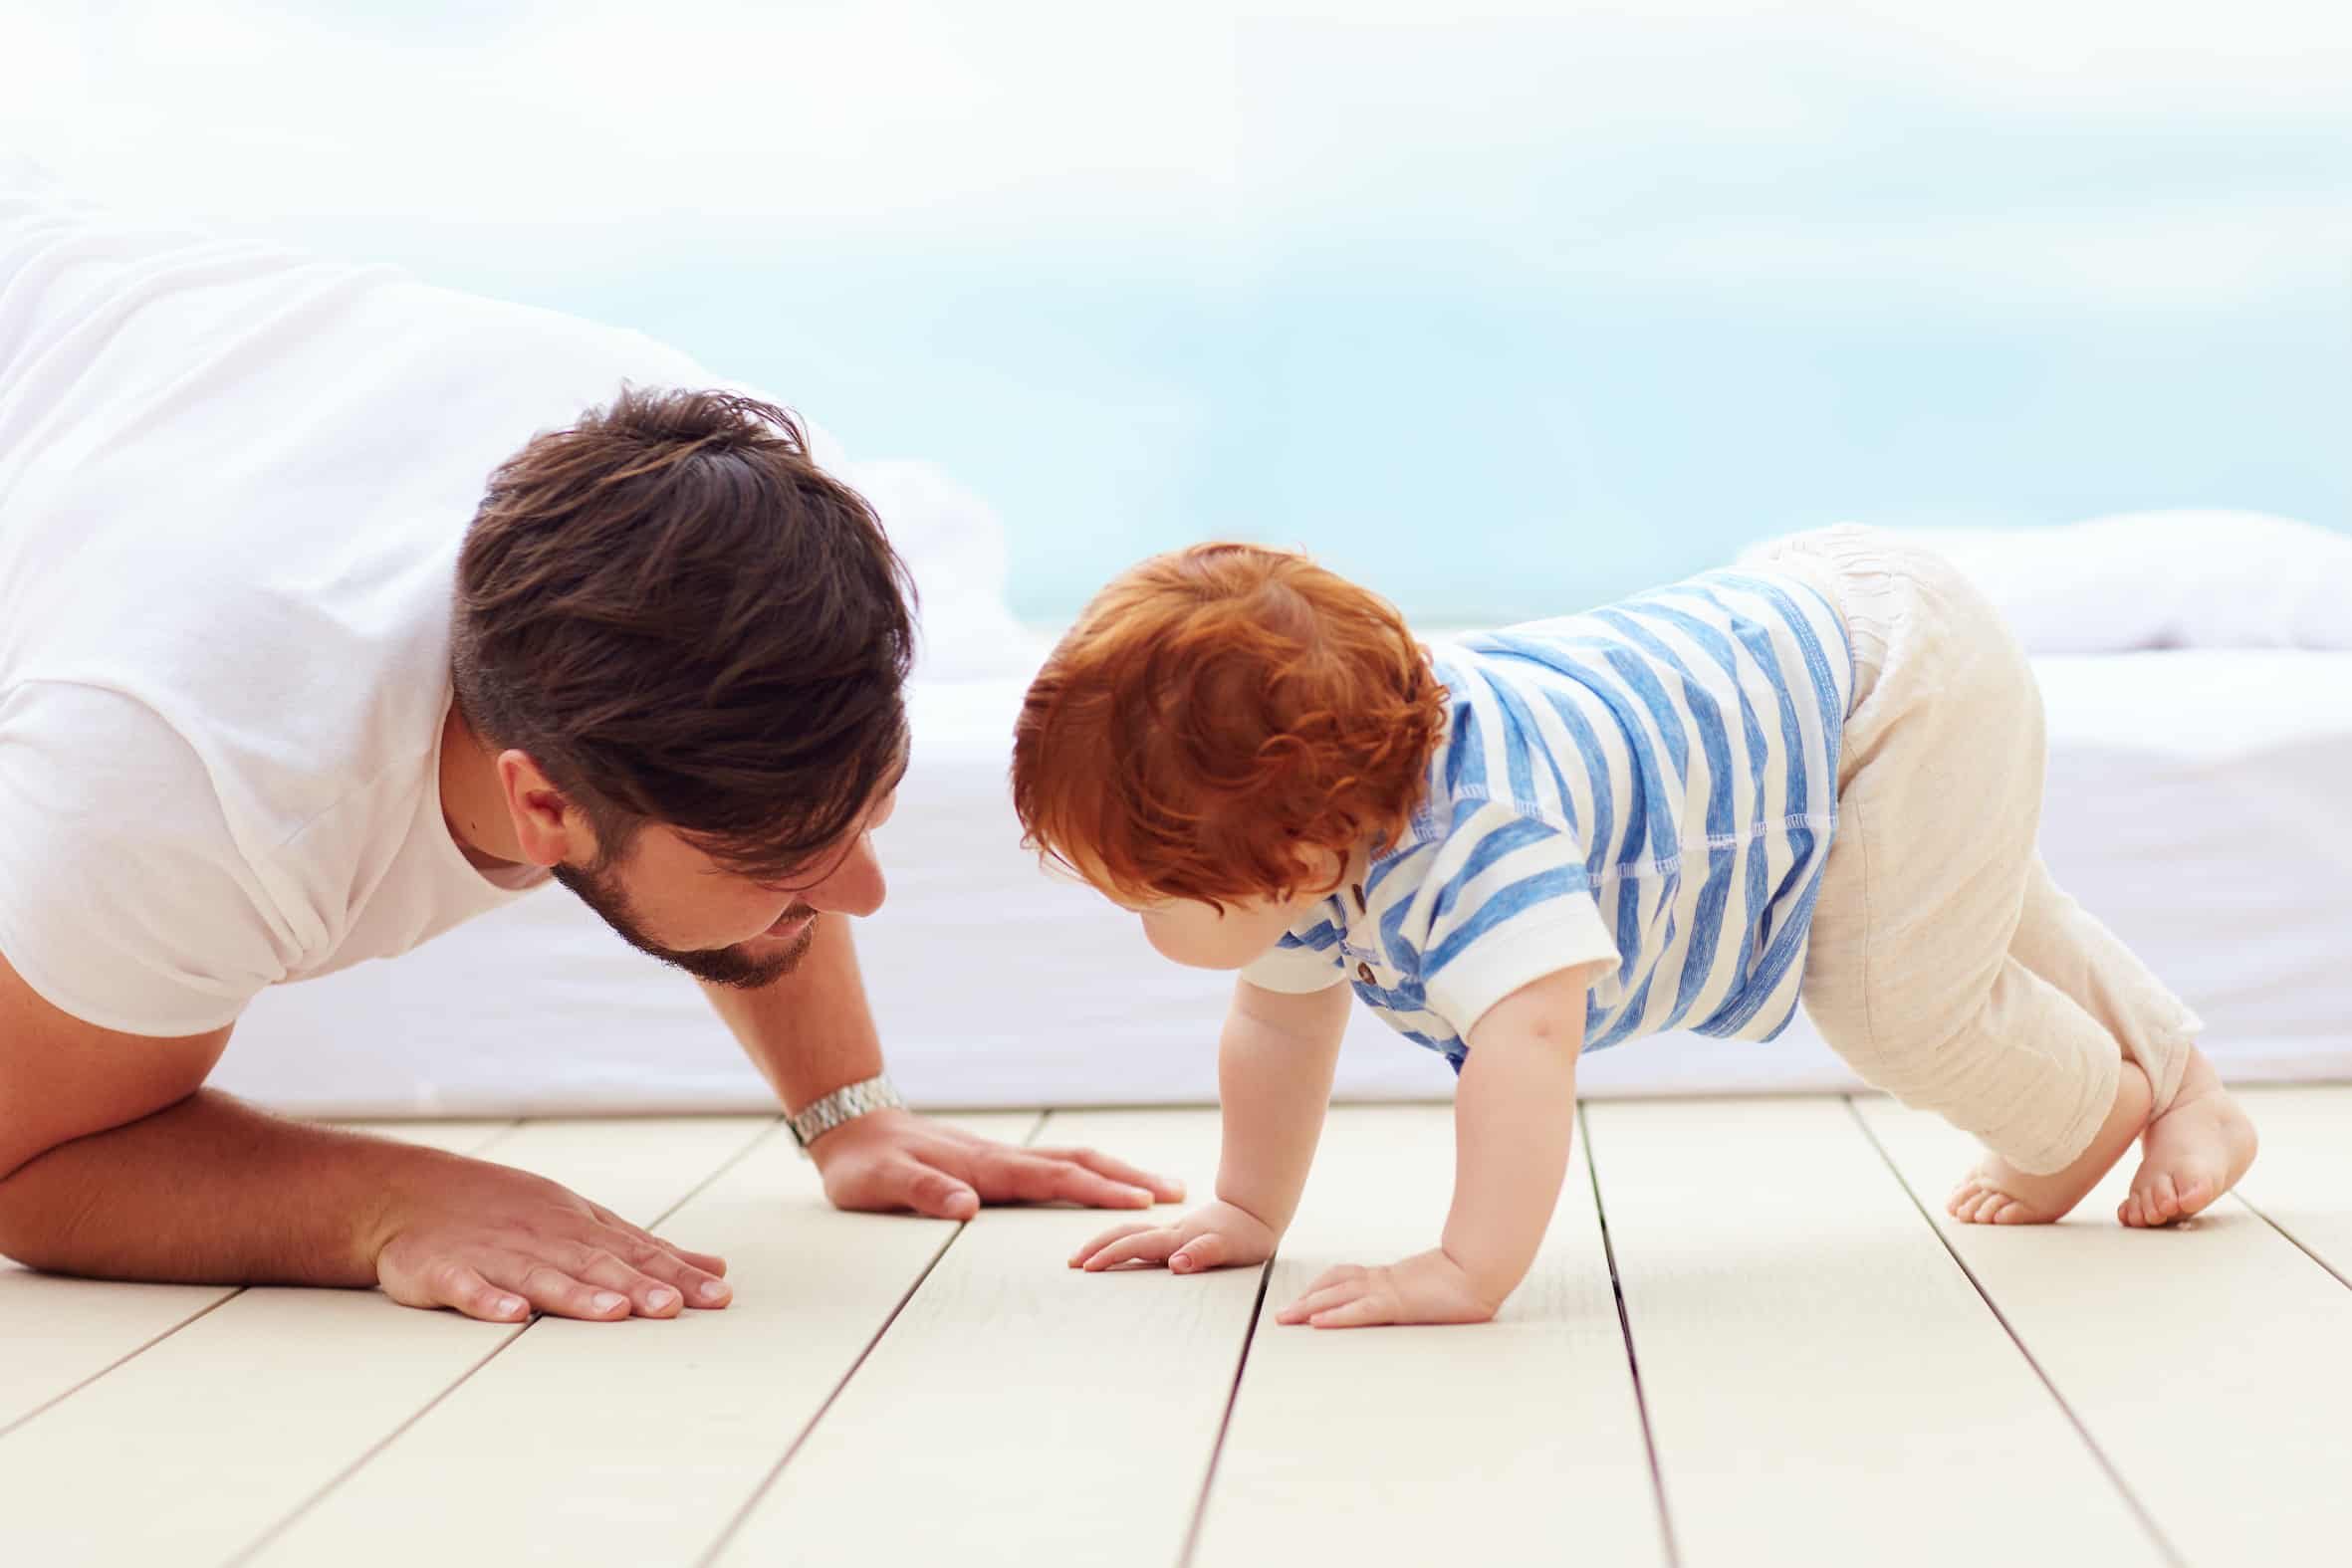 how to teach baby to crawl